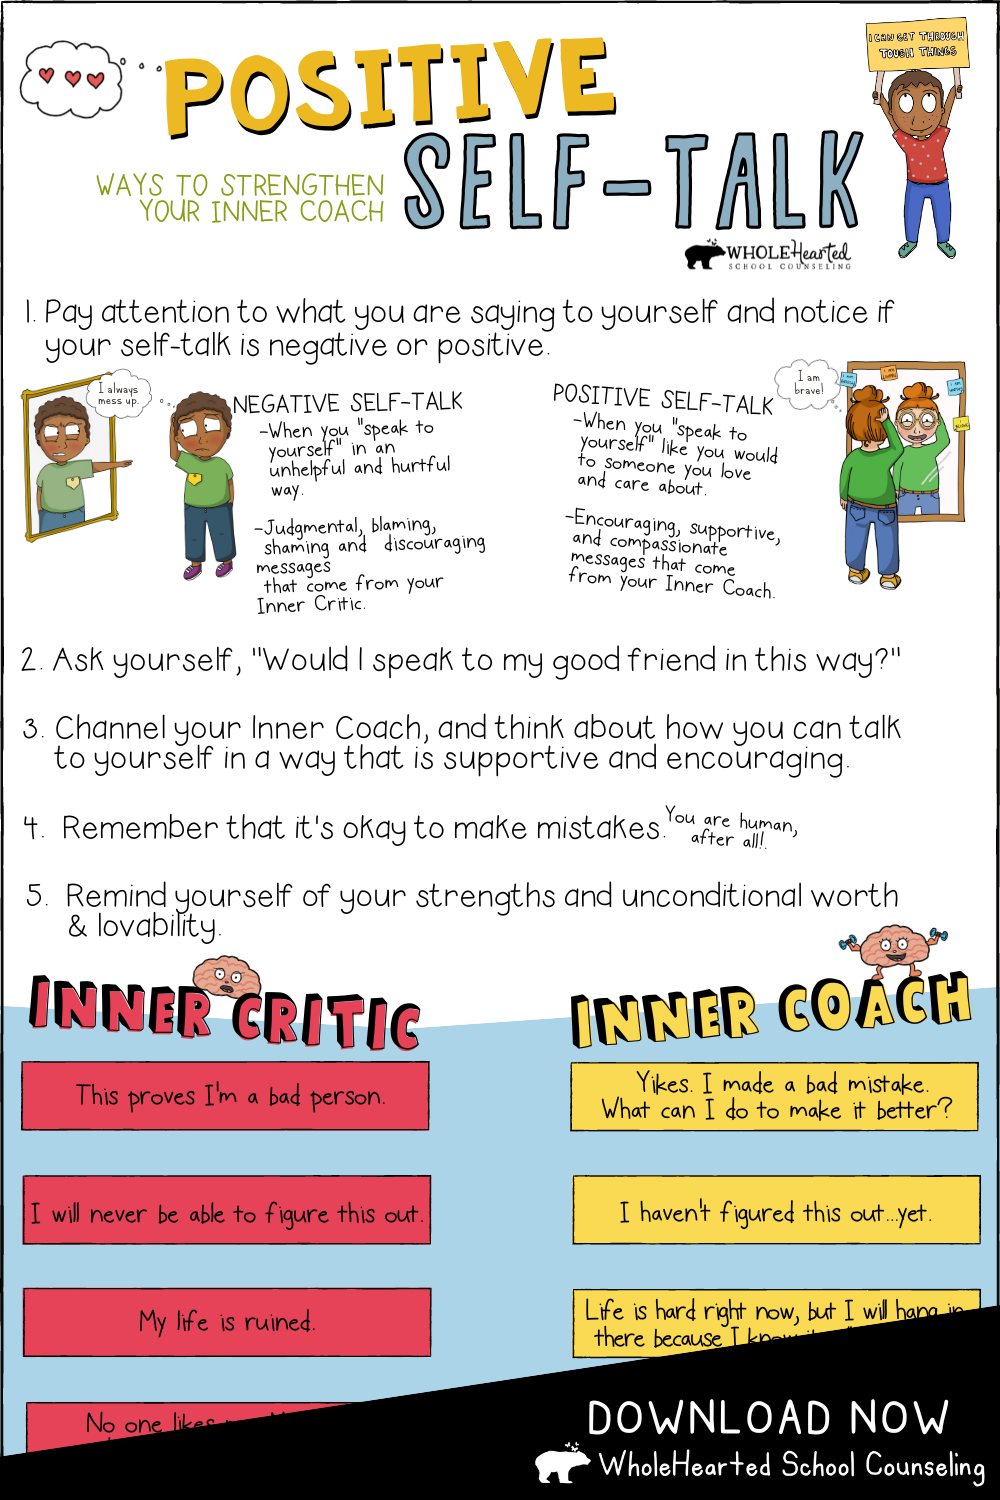 An infographic with definitions of positive self talk and negative self talk. Includes examples of your inner critic versus inner coach.